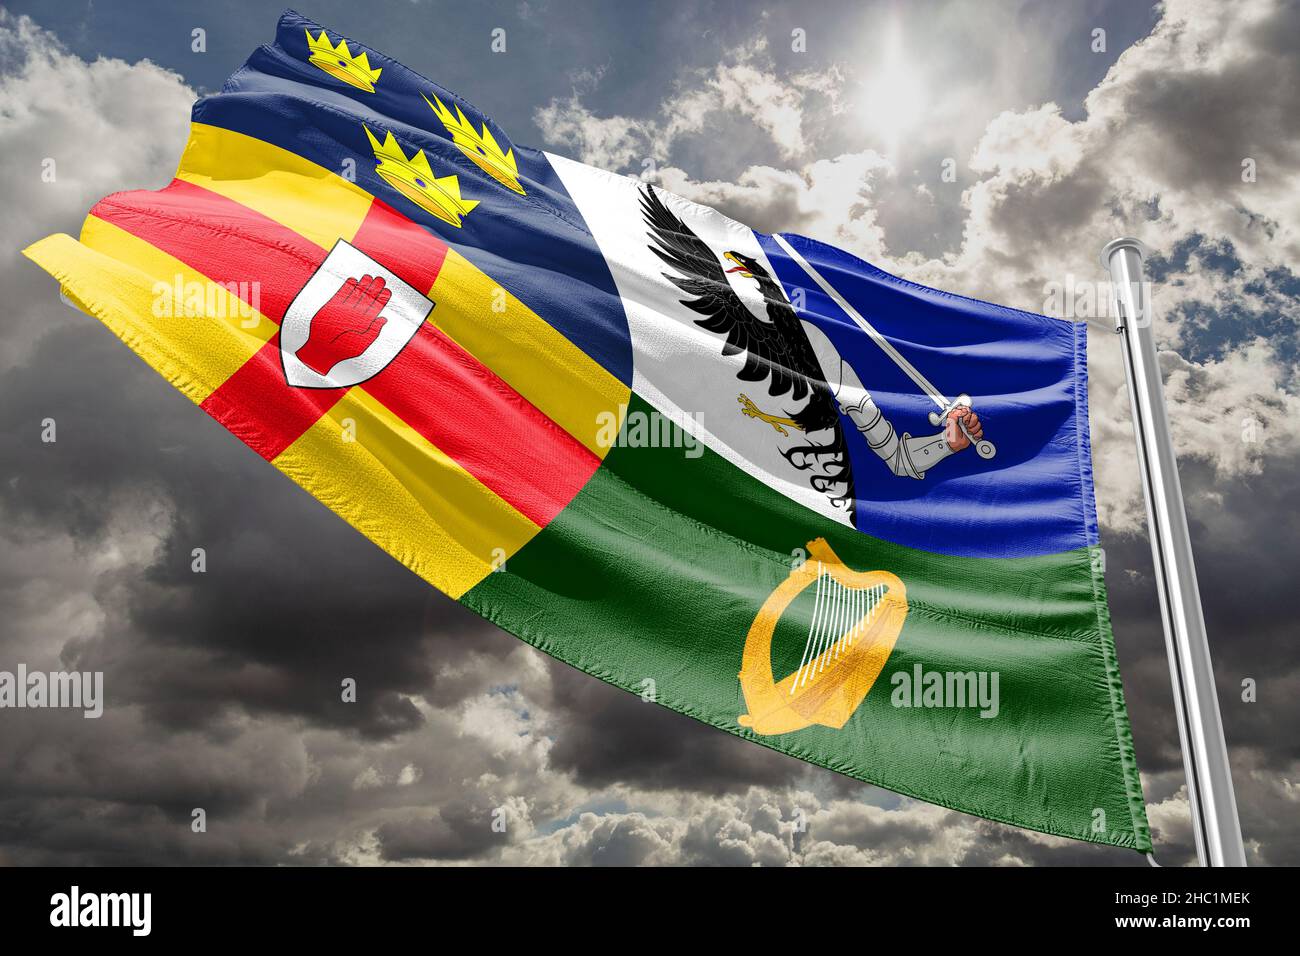 flag Provinces of Ireland: Connacht, Leinster, Munster, and Ulster. Stock Photo